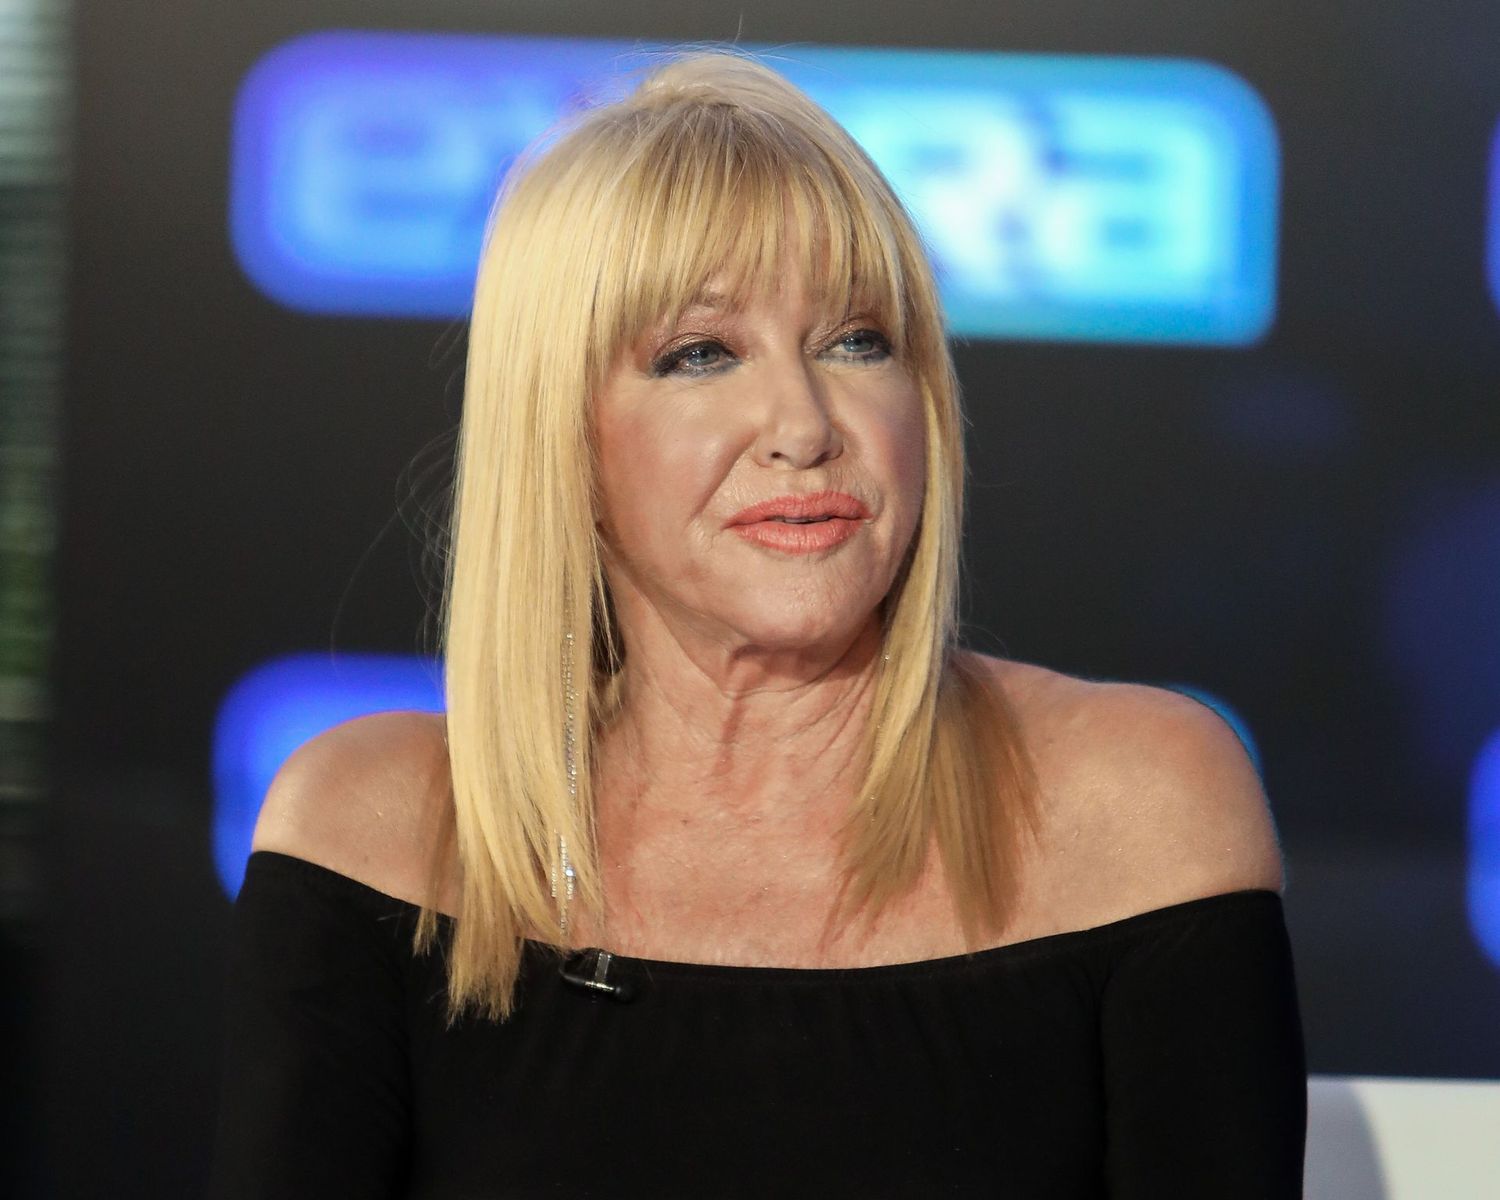 Suzanne Somers visits “Extra” at Burbank Studios on February 19, 2020, in California | Photo: Paul Archuleta/Getty Images